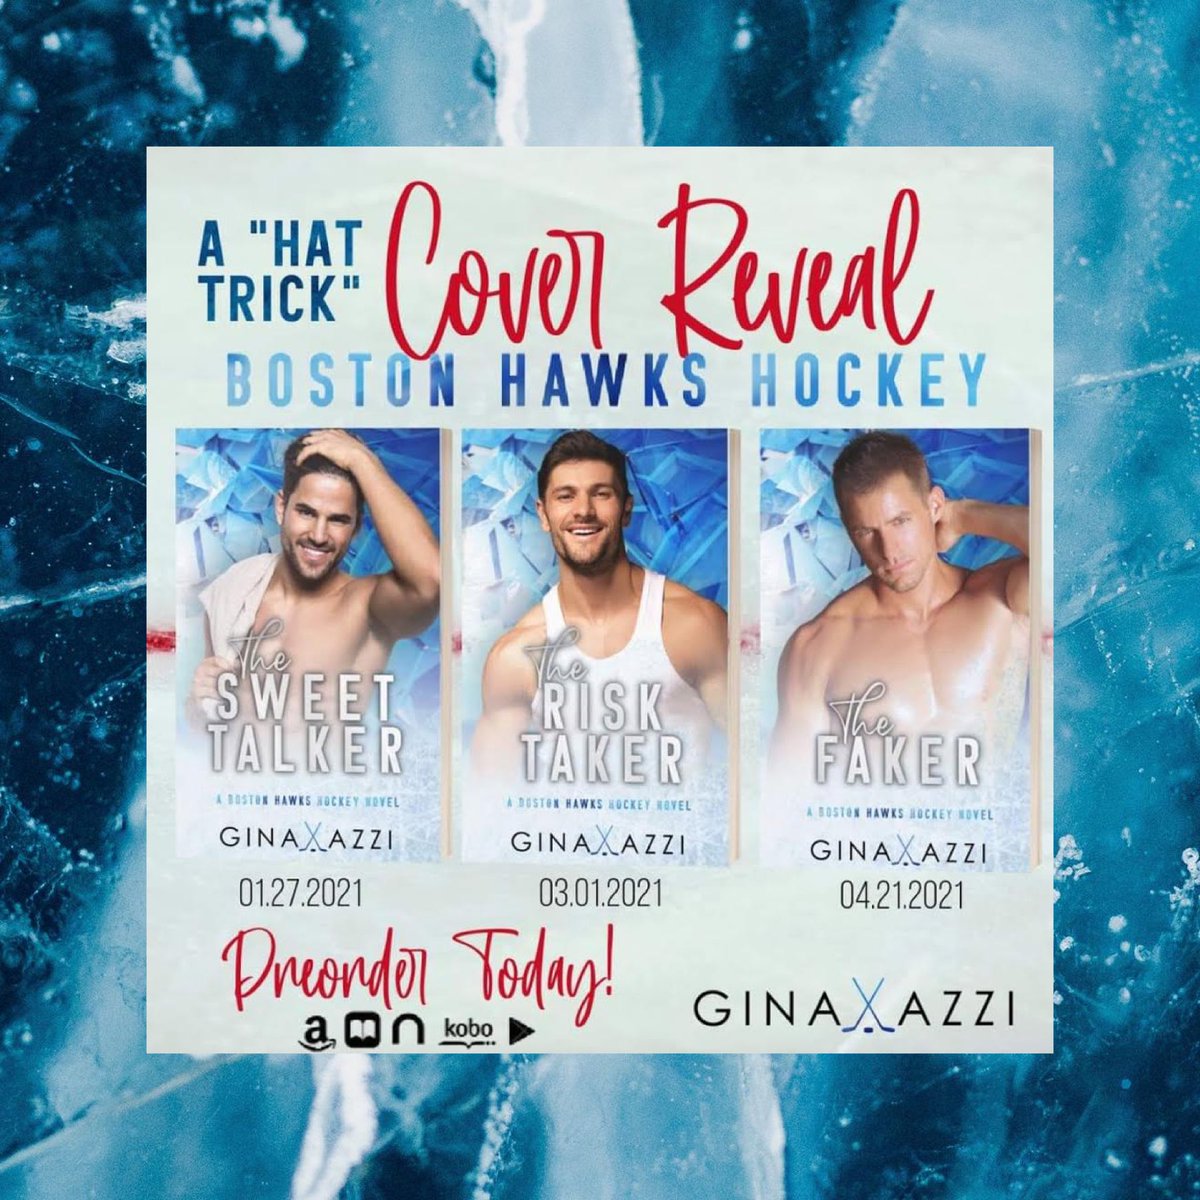 Check out this fantastic series cover reveal for the BOSTON HAWKS HOCKEY series from @gina_azzi!!
The 1st book in the series, THE SWEET TALKER releases 1/27!!

PREORDER BOOK #1 FOR ONLY $3.99 (limited time!)!
books2read.com/TheSweetTalker